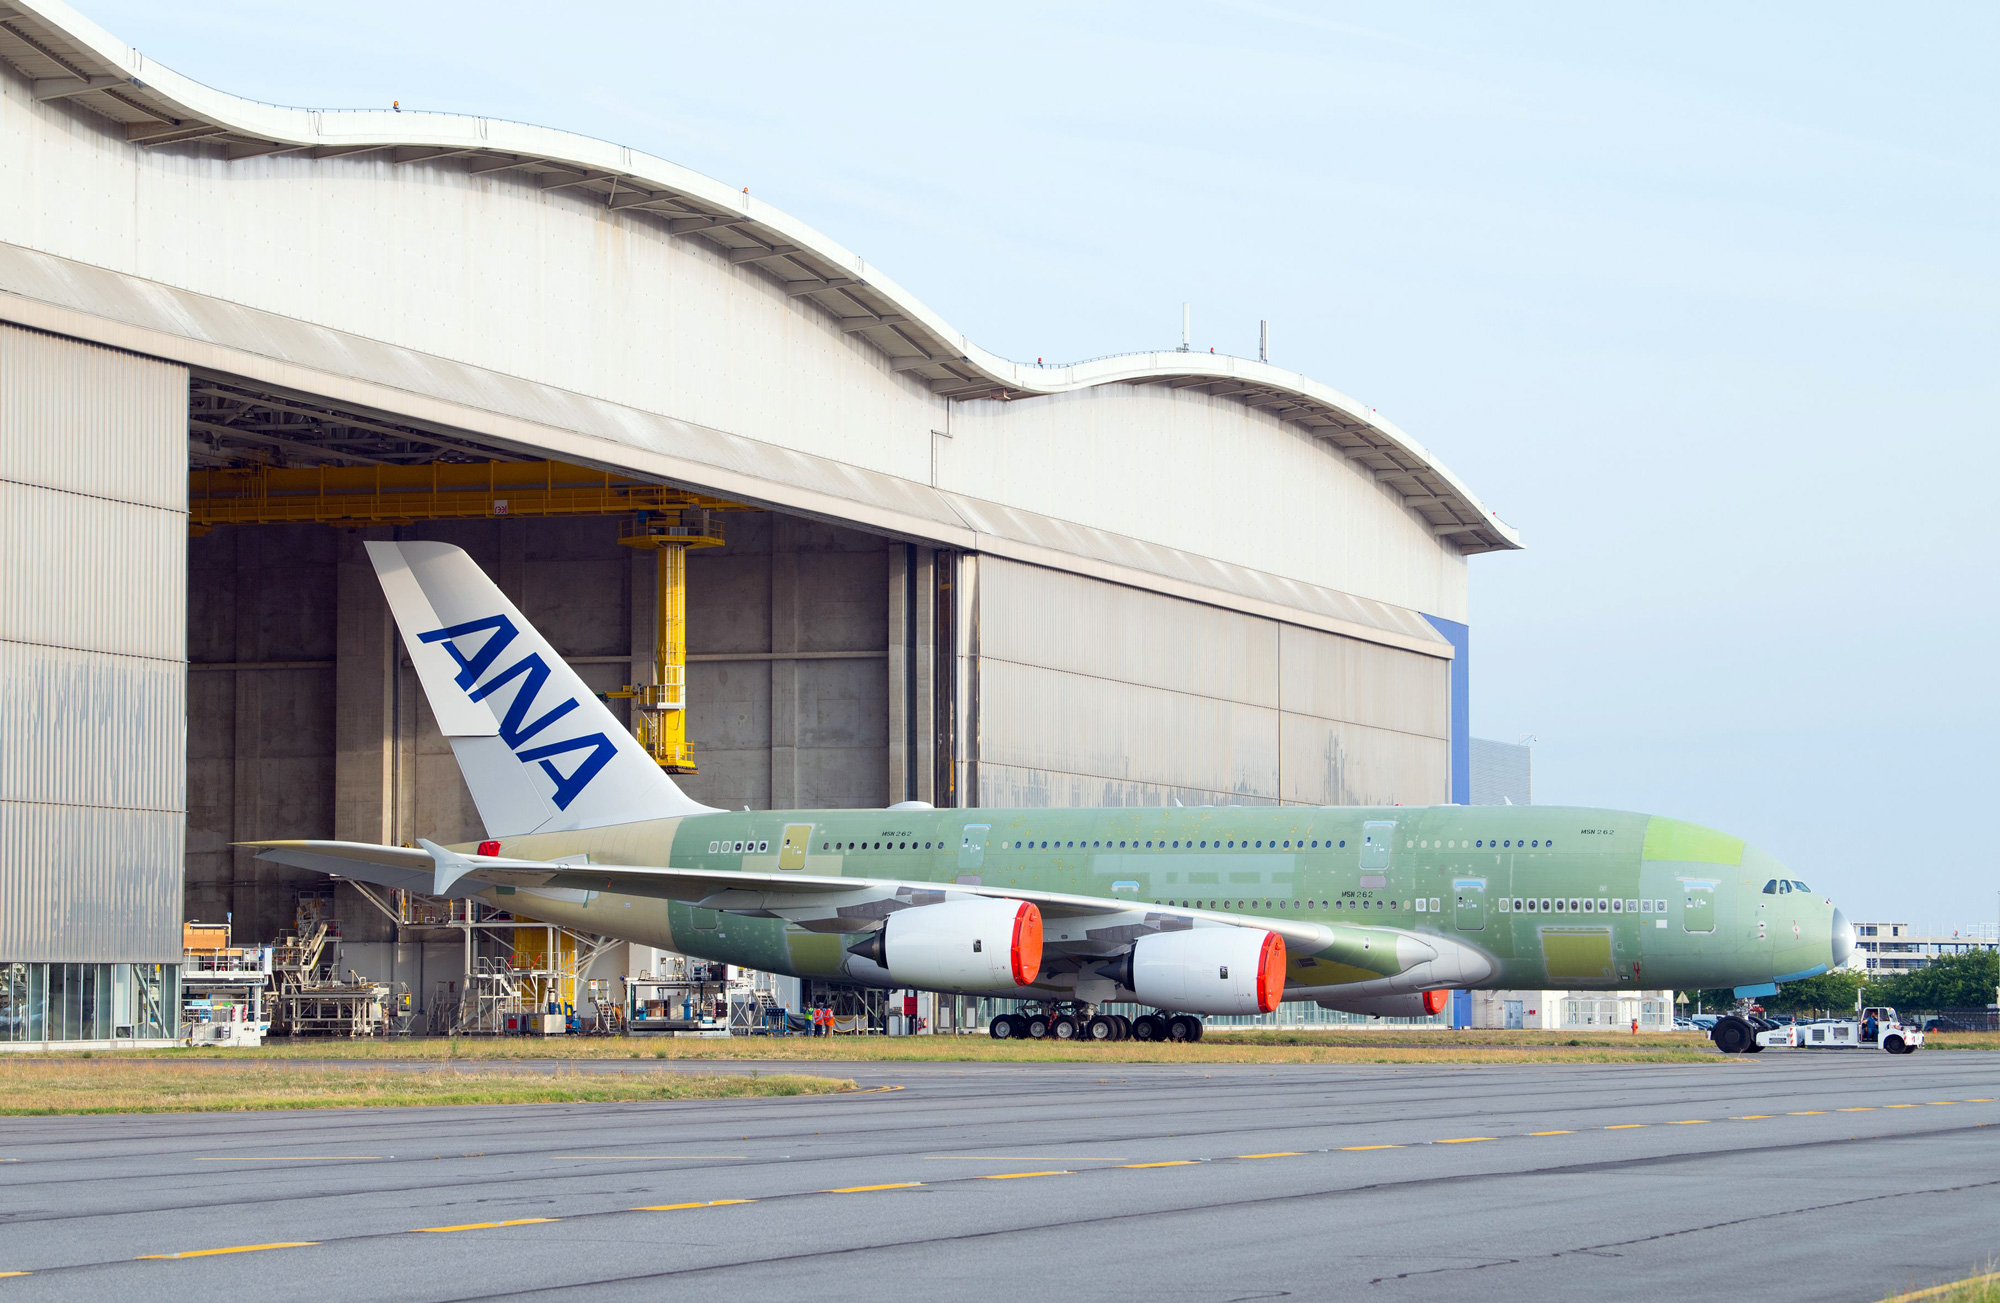 An All Nippon Airways A380 jet departs the Jean-Luc Lagardere plant in Toulouse, France in 2018.